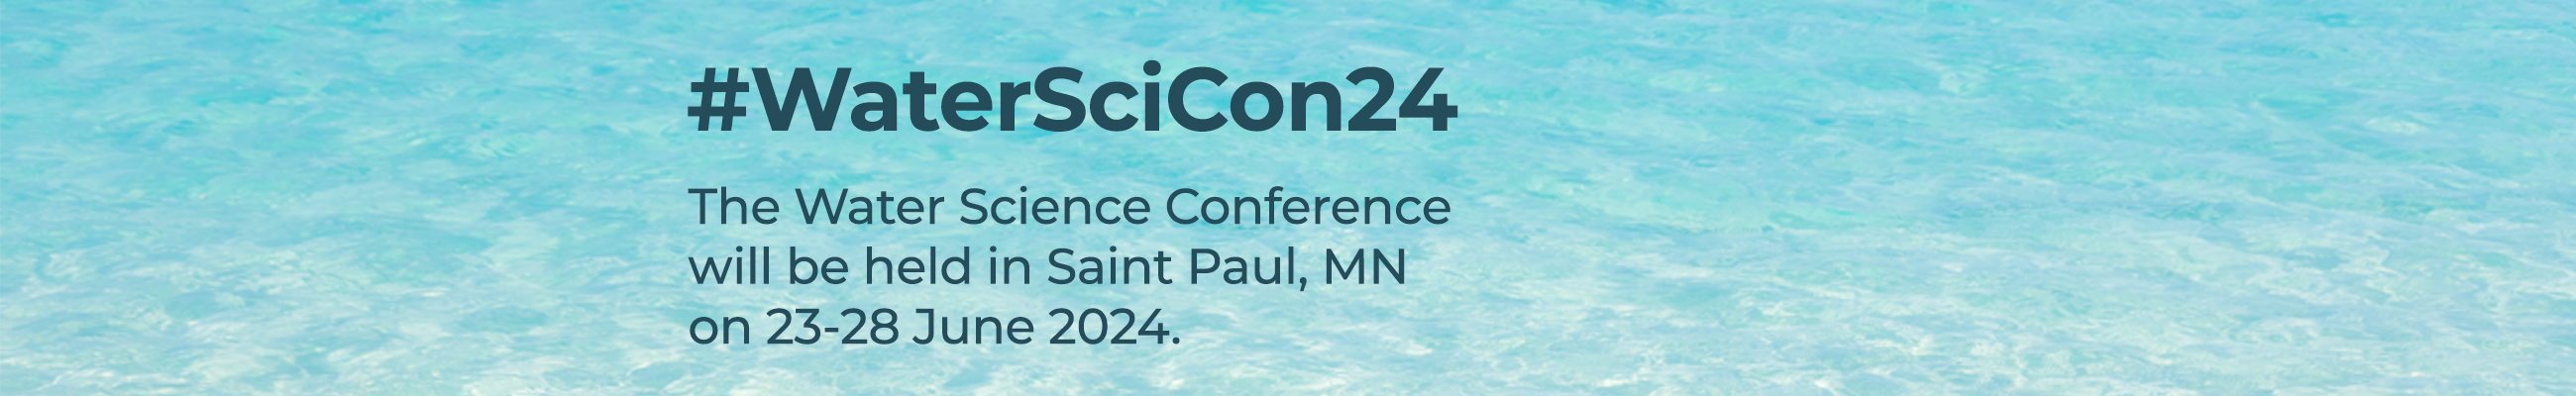 Aerial view of clear sunlit ocean waves with text #WaterSciCon24. The Water Science Conference will be held in Saint Paul, MN on 23-28 June 2024.